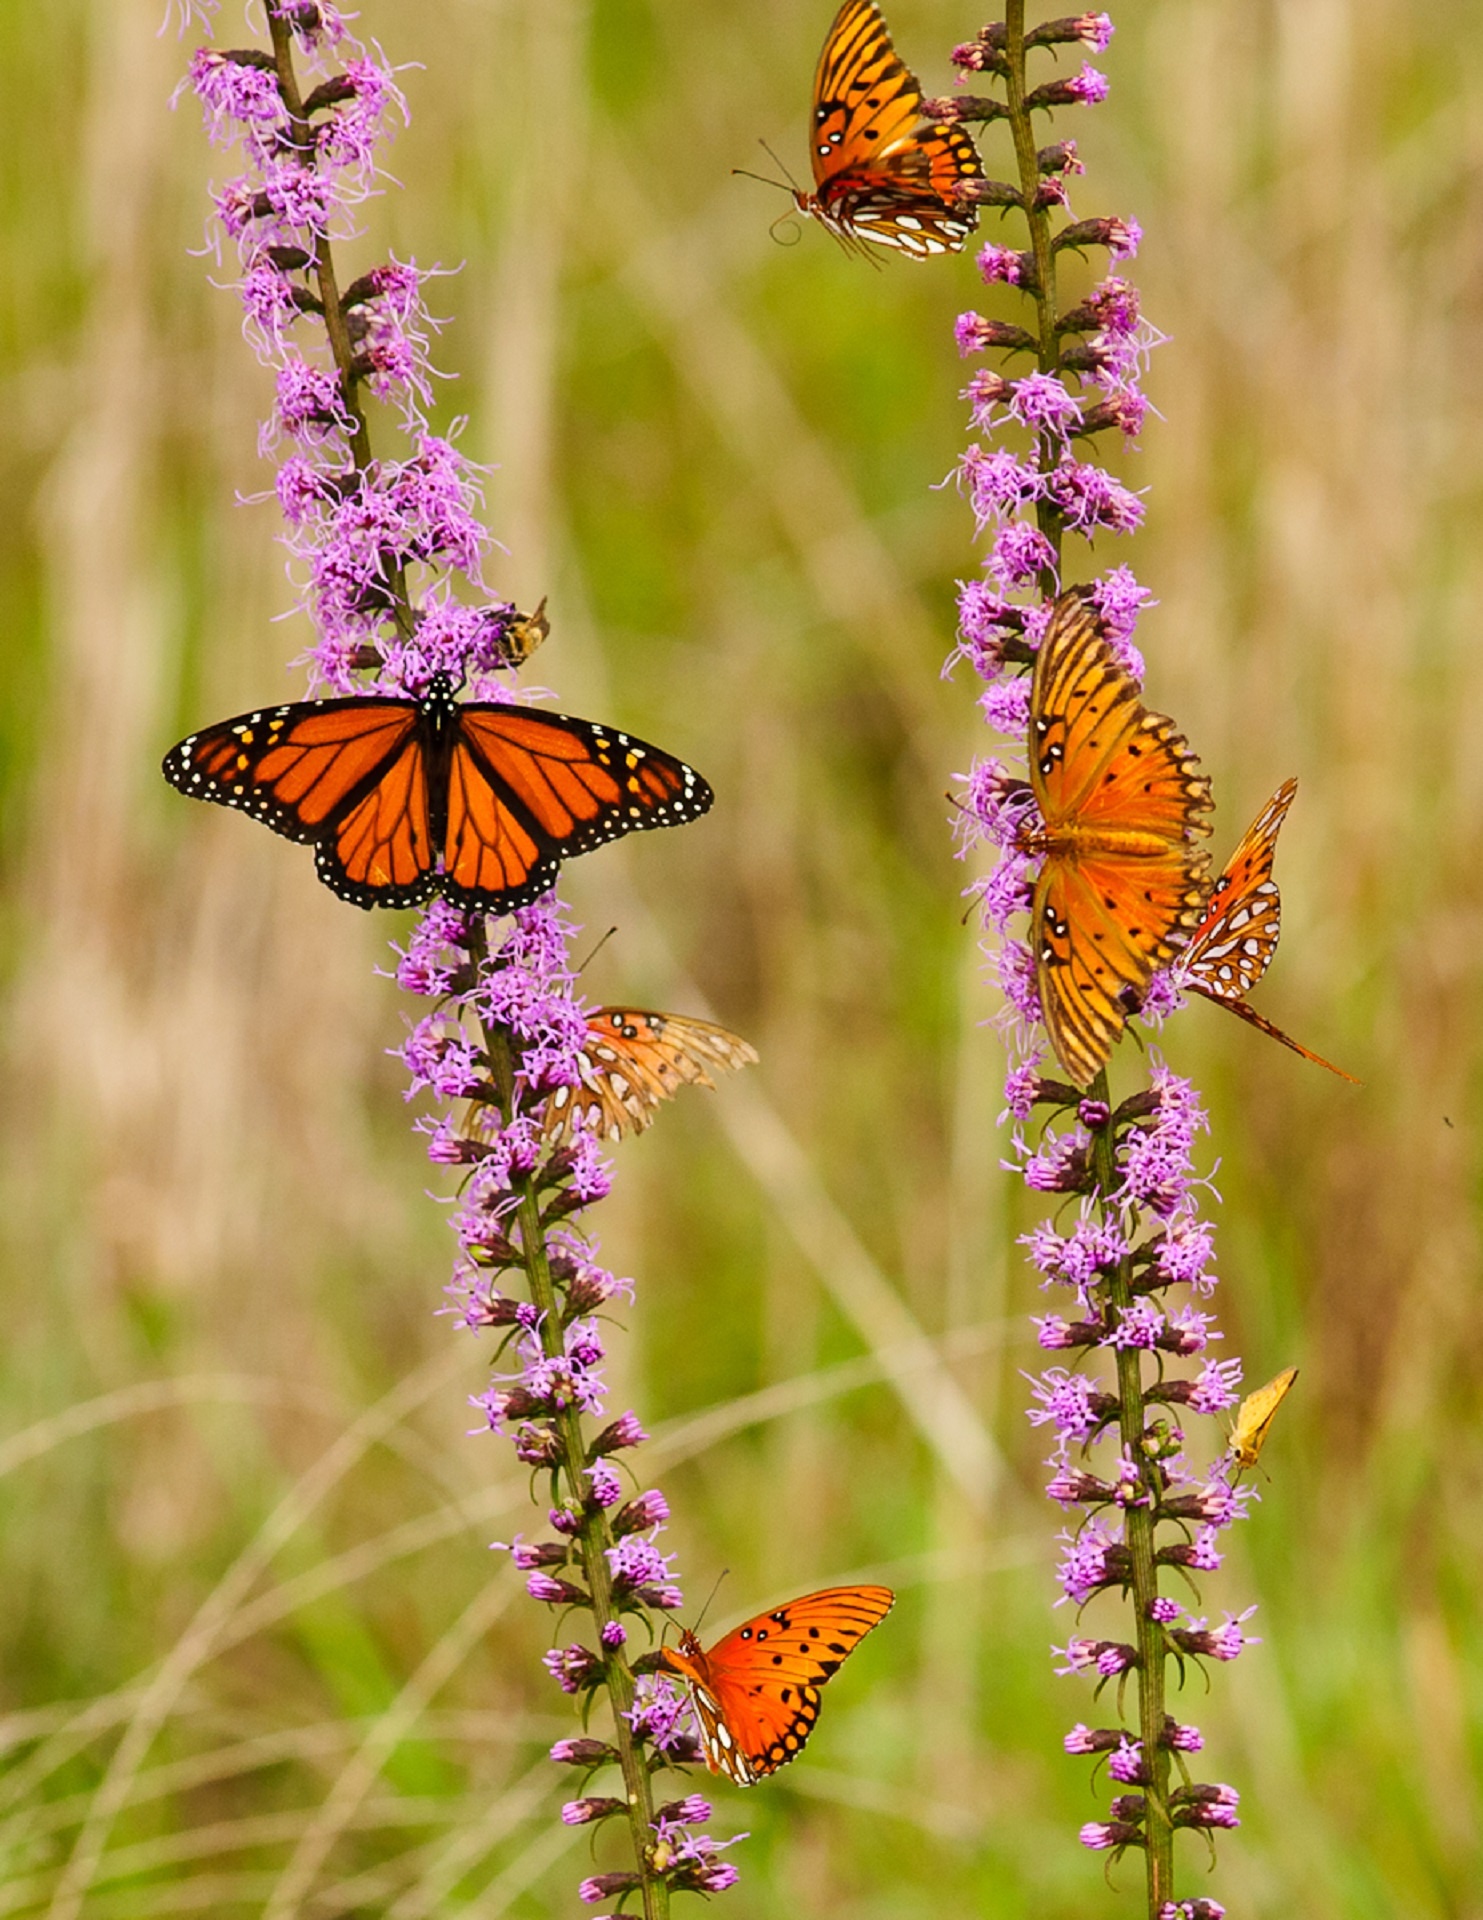 Butterflies on the flowers photo